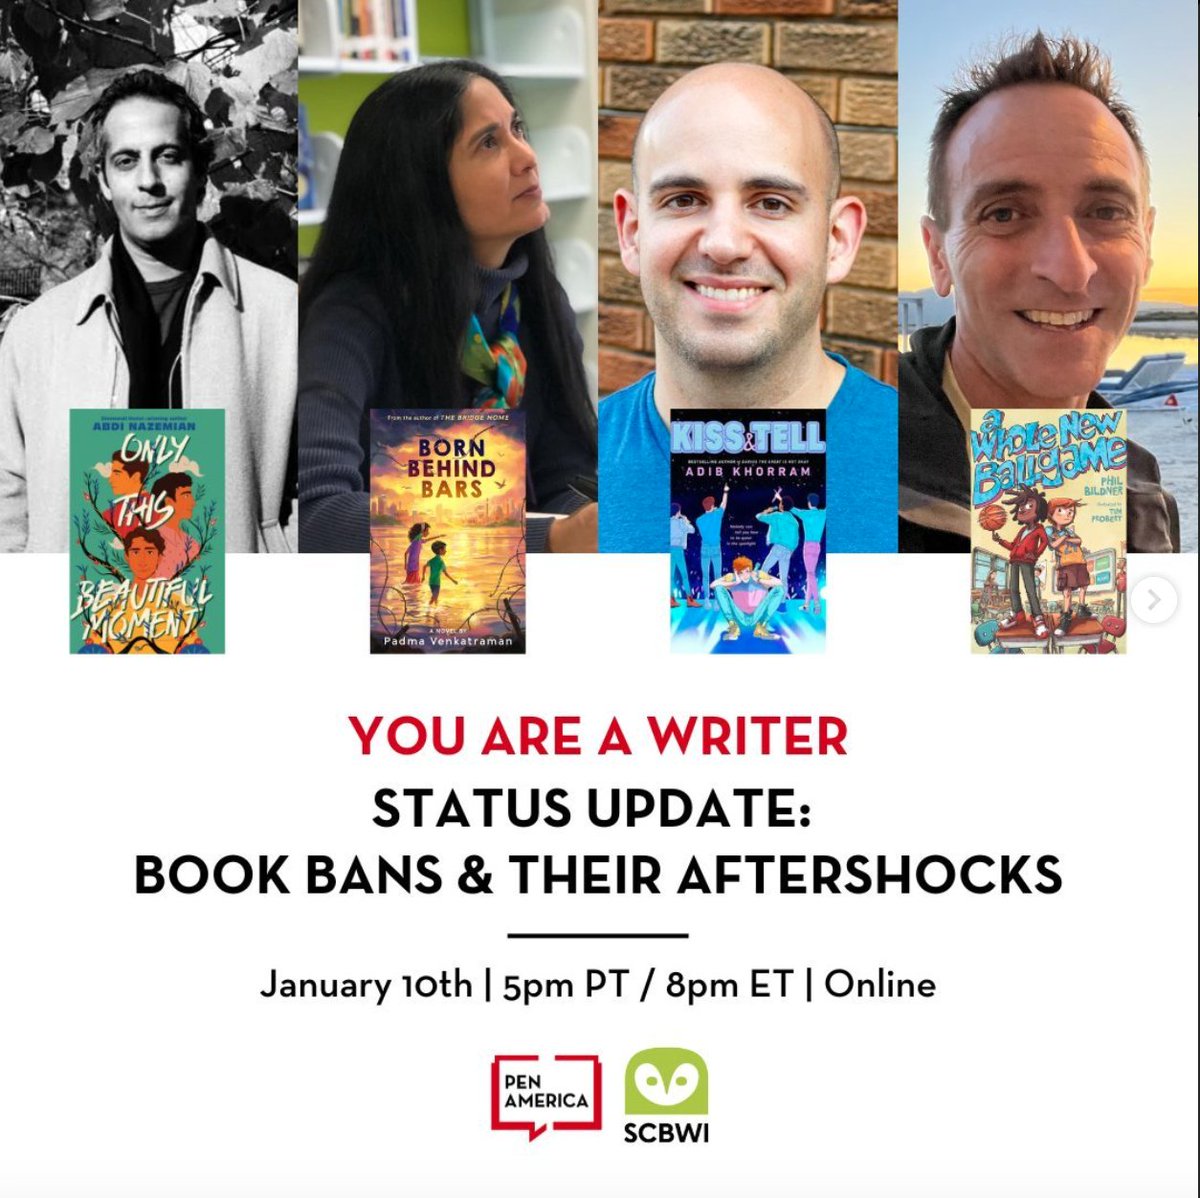 Honored to be invited by @PENamerica & @scbwi 

Join me #AdibKhorram #AbdiNazemian @PhilBildner for this free webinar
Tonight
Wed 10 Jan 10
8 pm Eastern
#firstamendment #teachers #librarians #bibliophile #Bookworm #banned #books #PENAmerica #SCBWI #bookish
pen.org/event/you-are-…